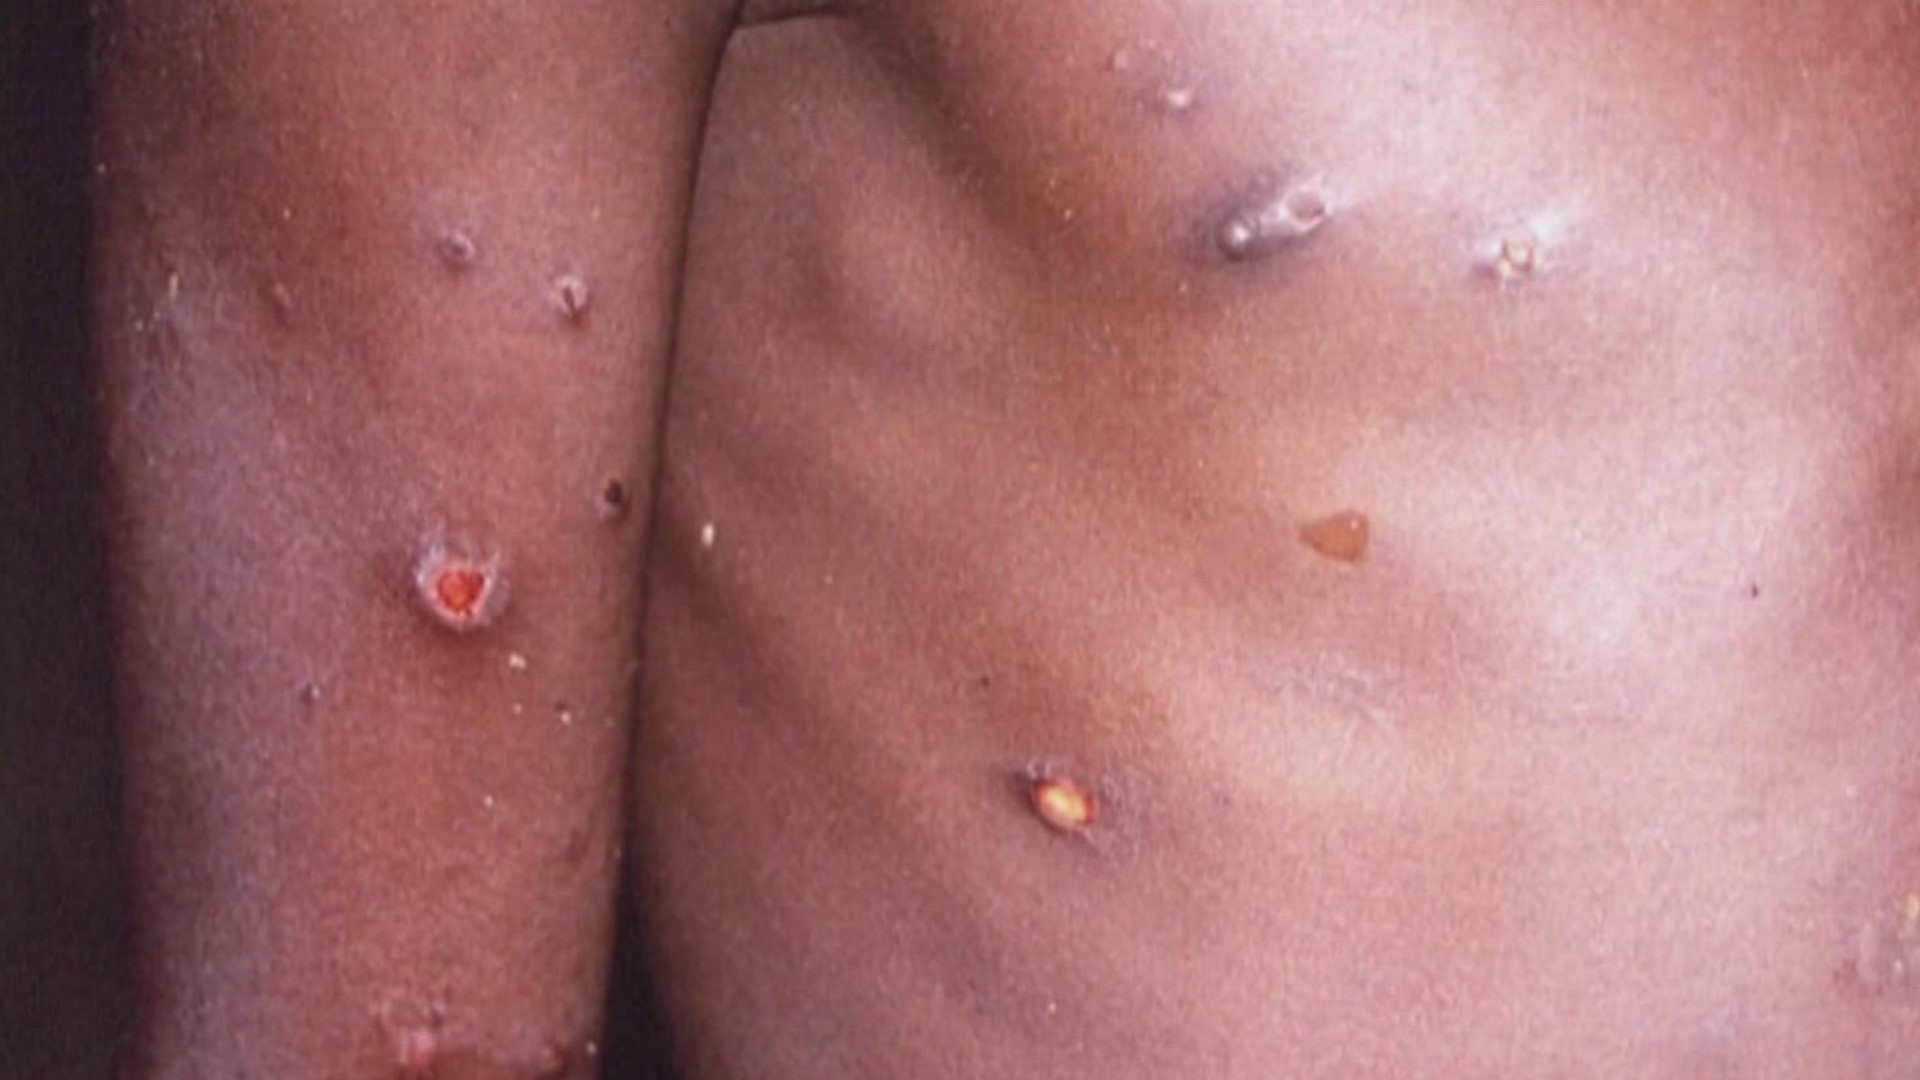 As of today, there are more than 4,600 cases of monkeypox in the United States. In Arkansas, there are 4 confirmed cases. But, it's not as infectious as COVID.